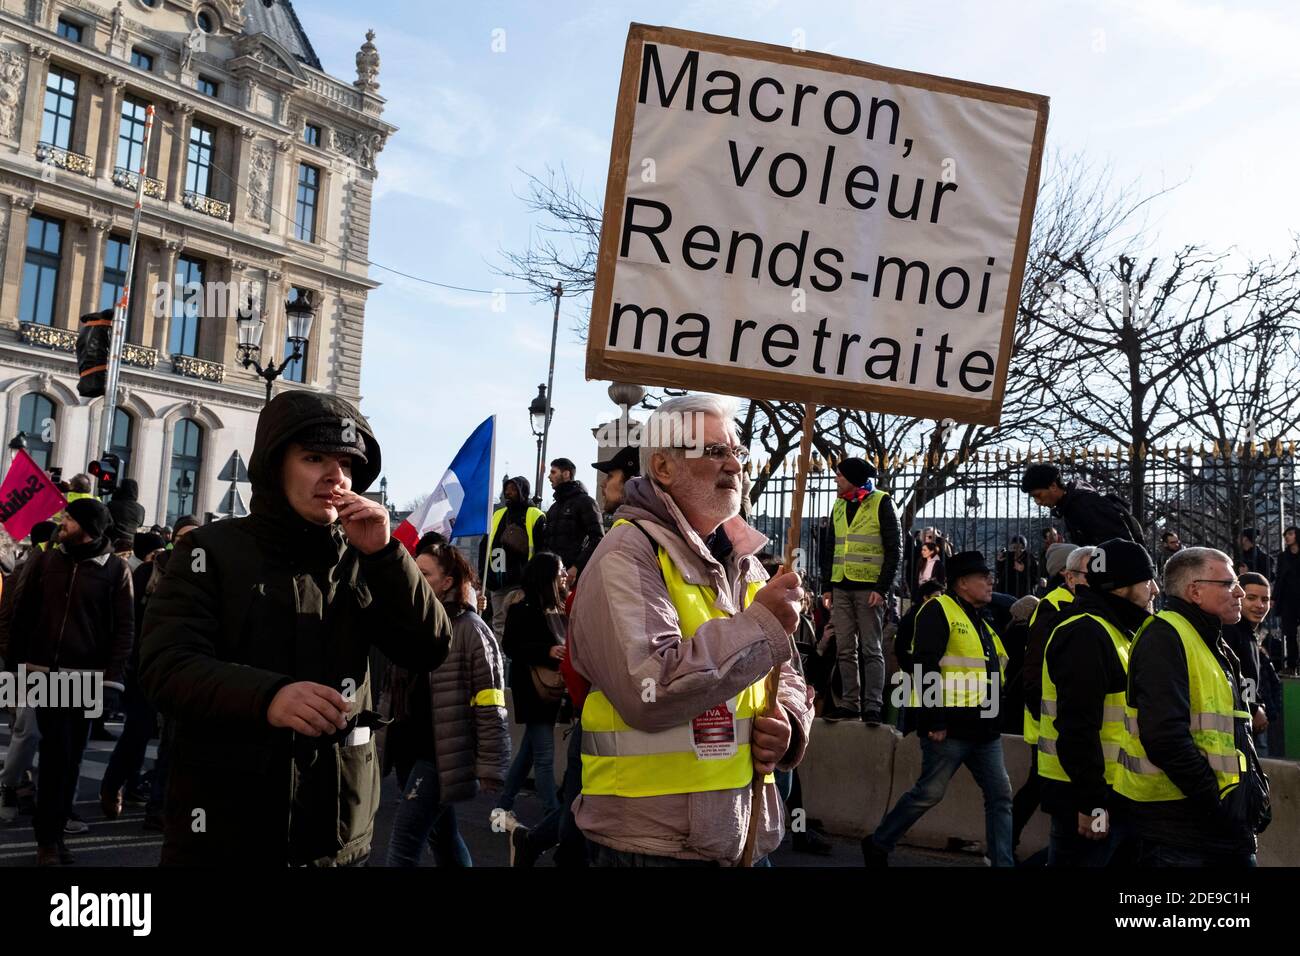 A retired demonstrator holds a sign that reads 'Macron thief, give me back my pension'. Several thousand demonstrators from CGT unions, Gilets Jaunes (Yellow Jackets), and students marched between Place de l'Hotel de Ville and Place de la Concorde as part of the national strike day to demand increased purchasing power and tax justice. Paris, France, February 5, 2019. Photo by Samuel Boivin / ABACAPRESS.COM Stock Photo